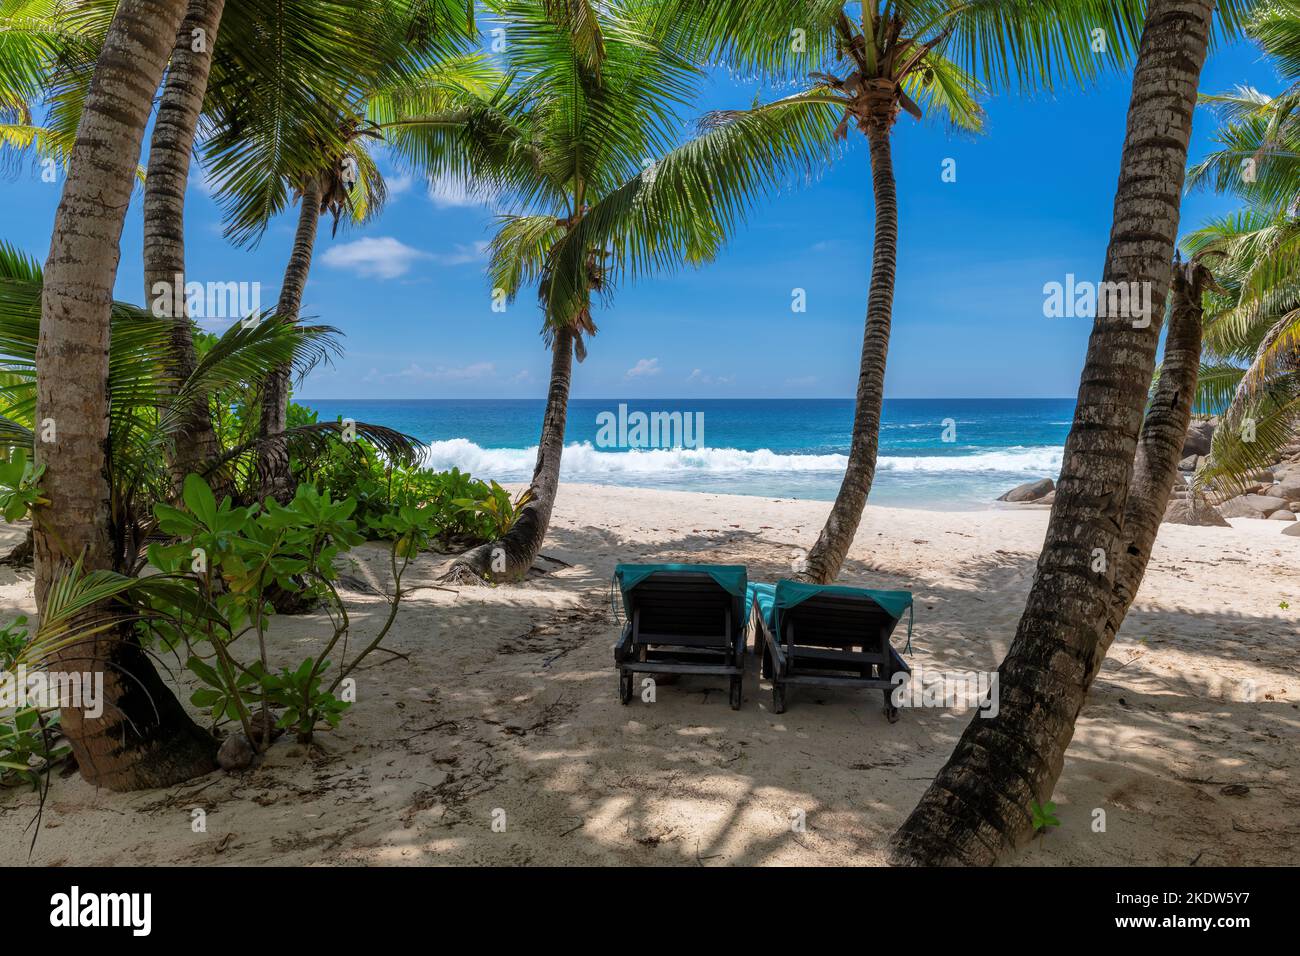 Beach loungers in the shade of palm trees on an exotic beach on a tropical island in Indian ocean. Stock Photo